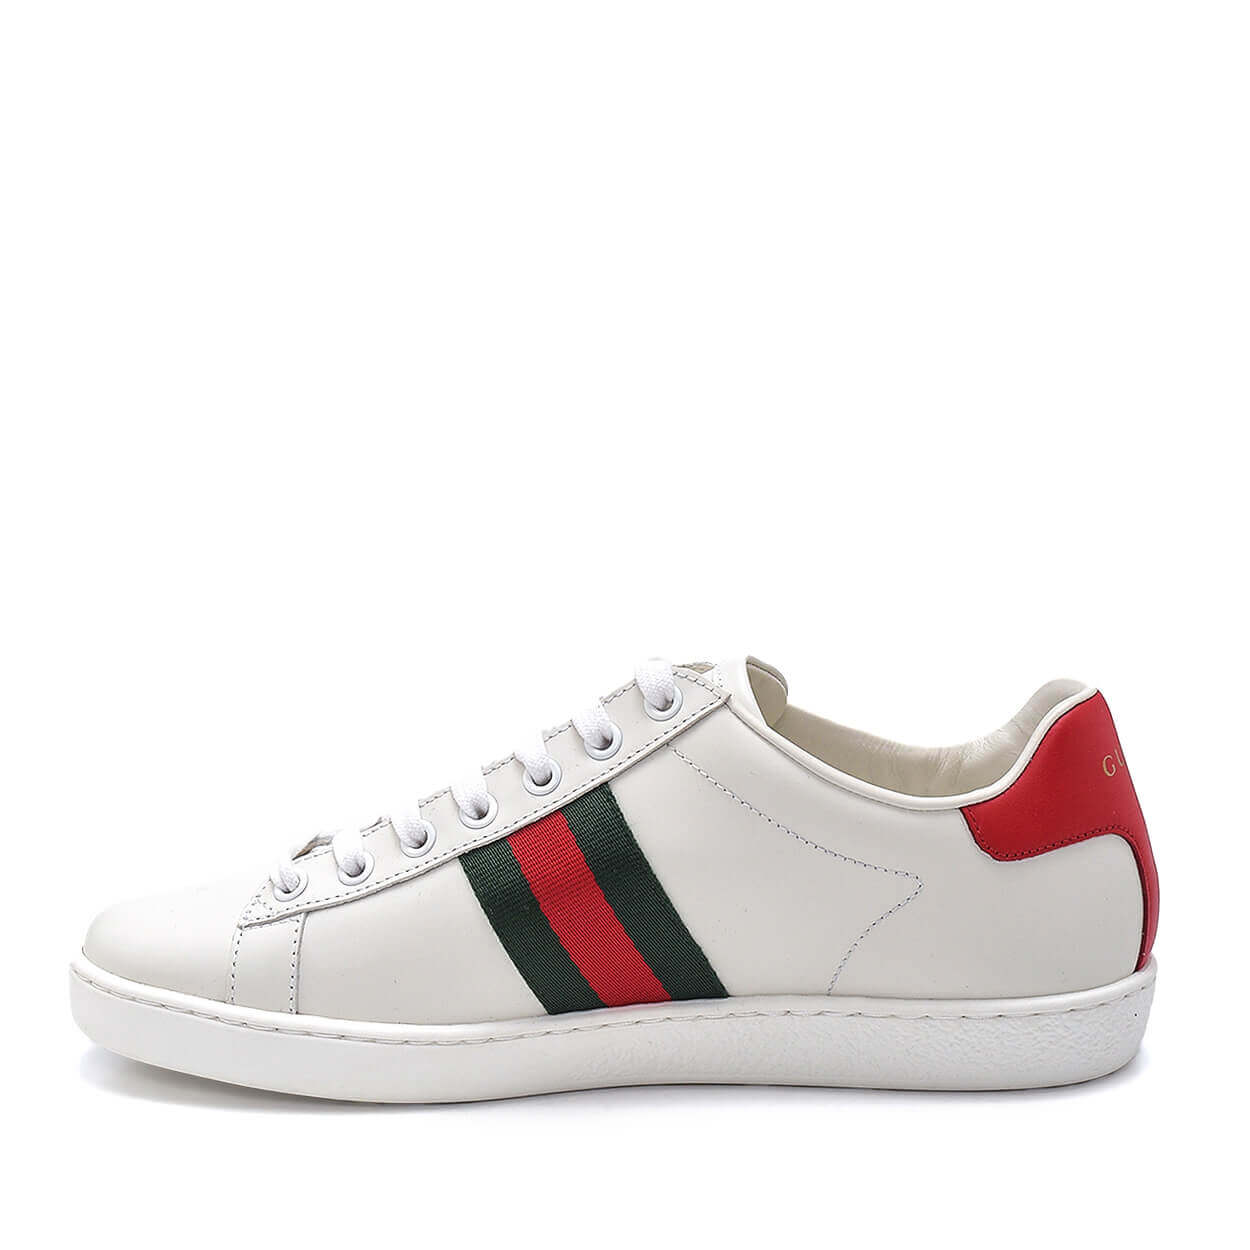 Gucci - White Leather Gucci Tiger Patch Web Striped Low Top Ace Sneakers